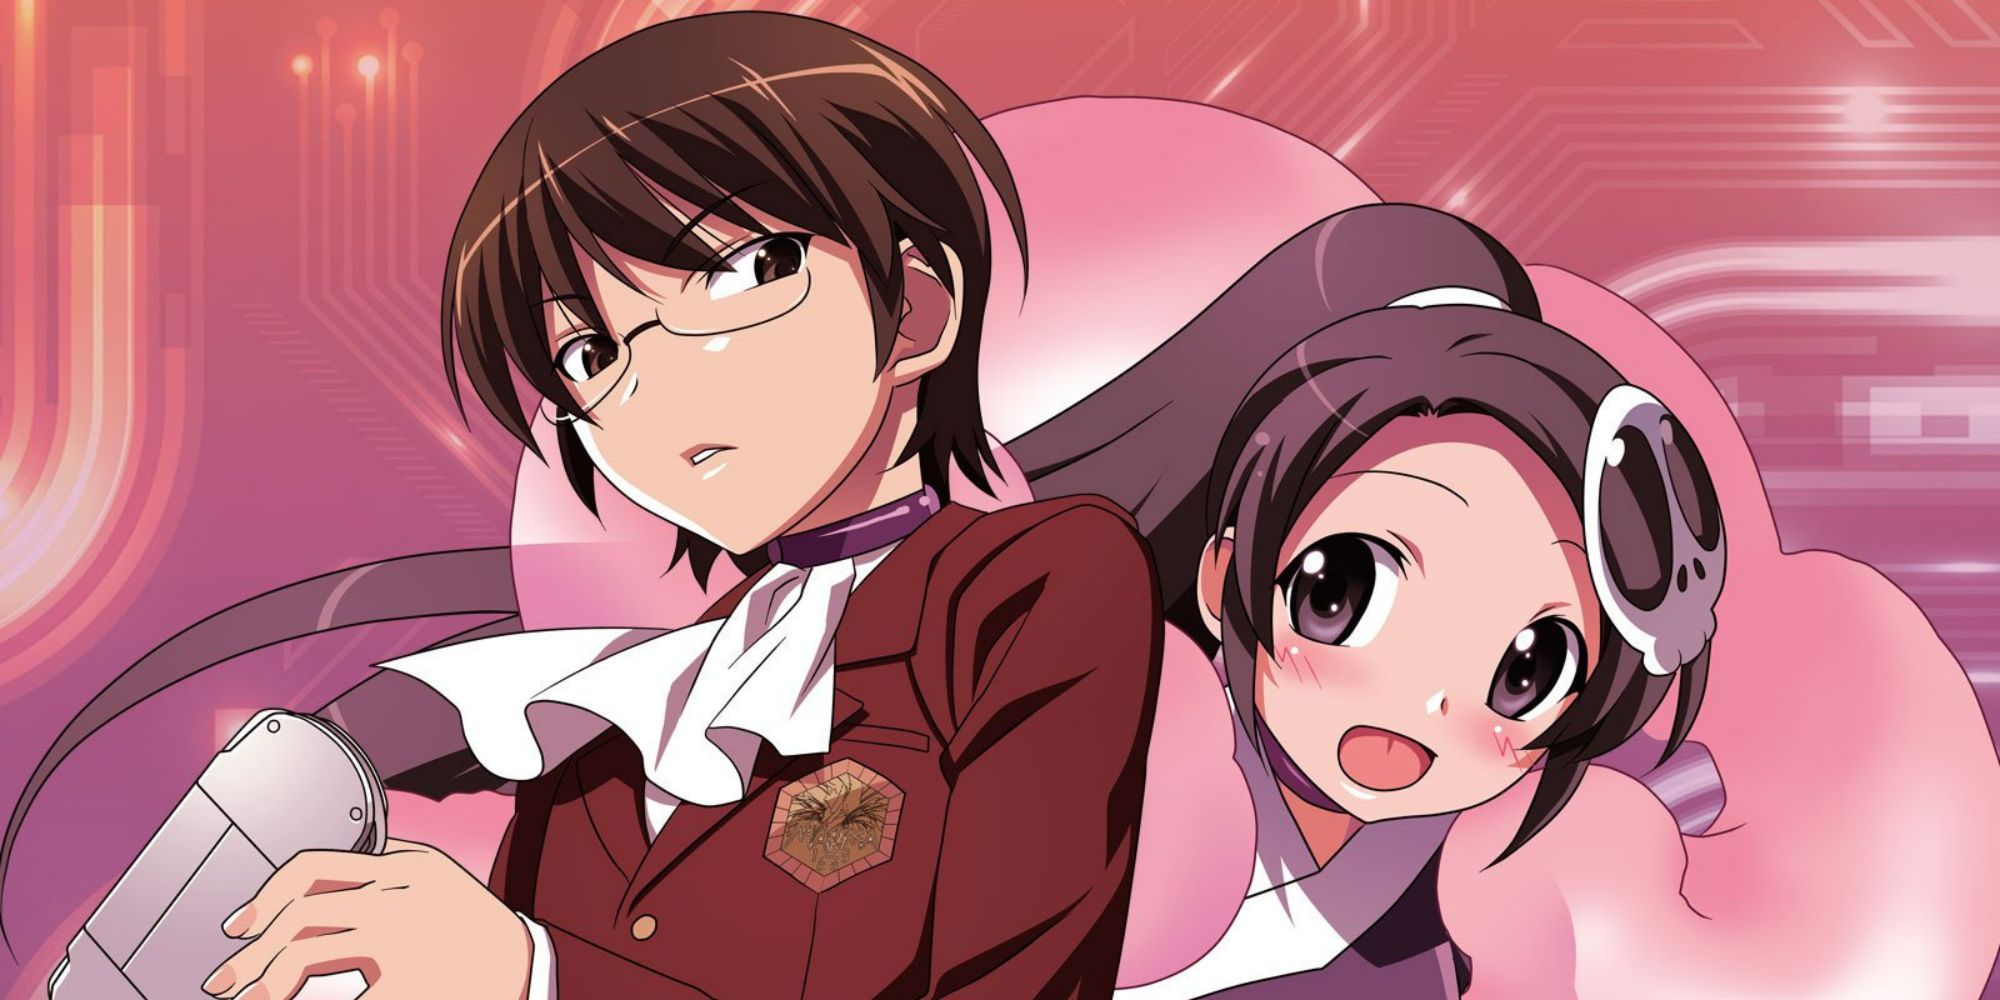 The two main characters of The World God Only Knows standing back-to-back